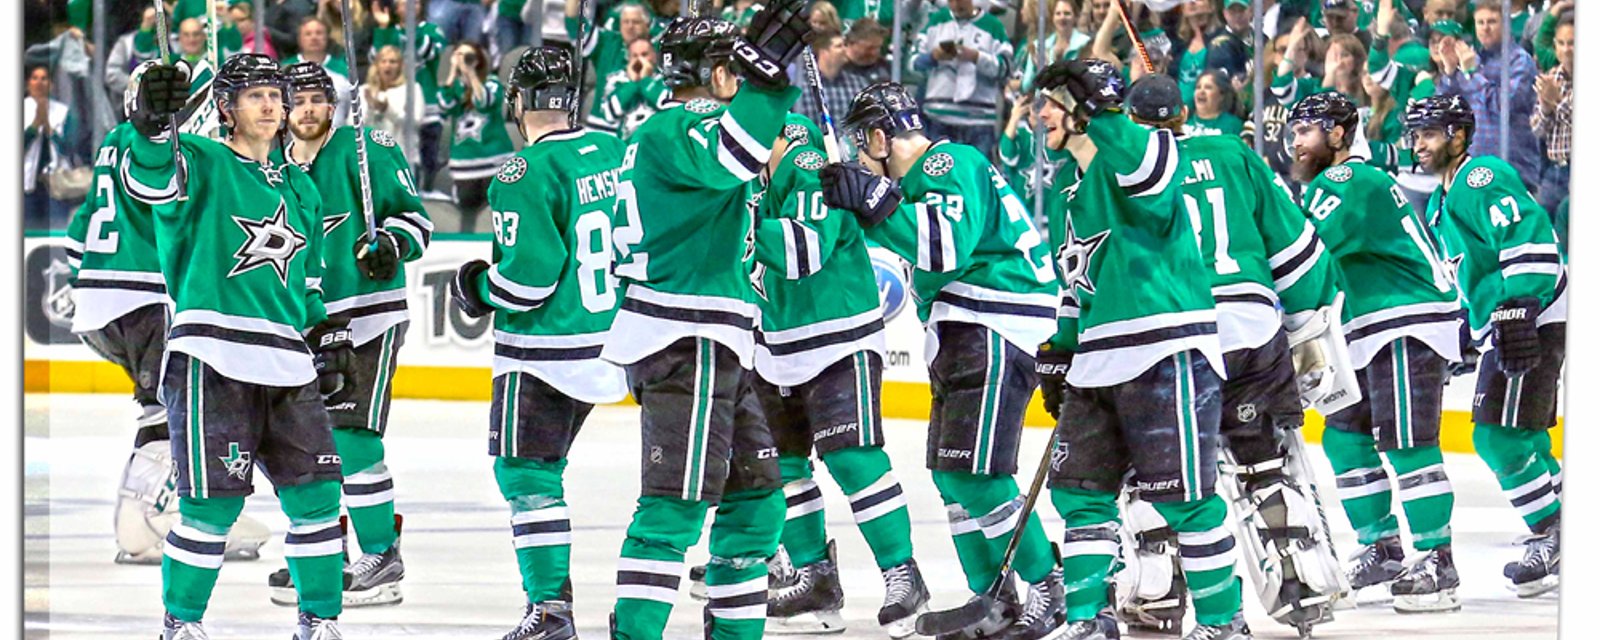 Stars making plans to play in Mexico and become “the NHL team for Mexico”